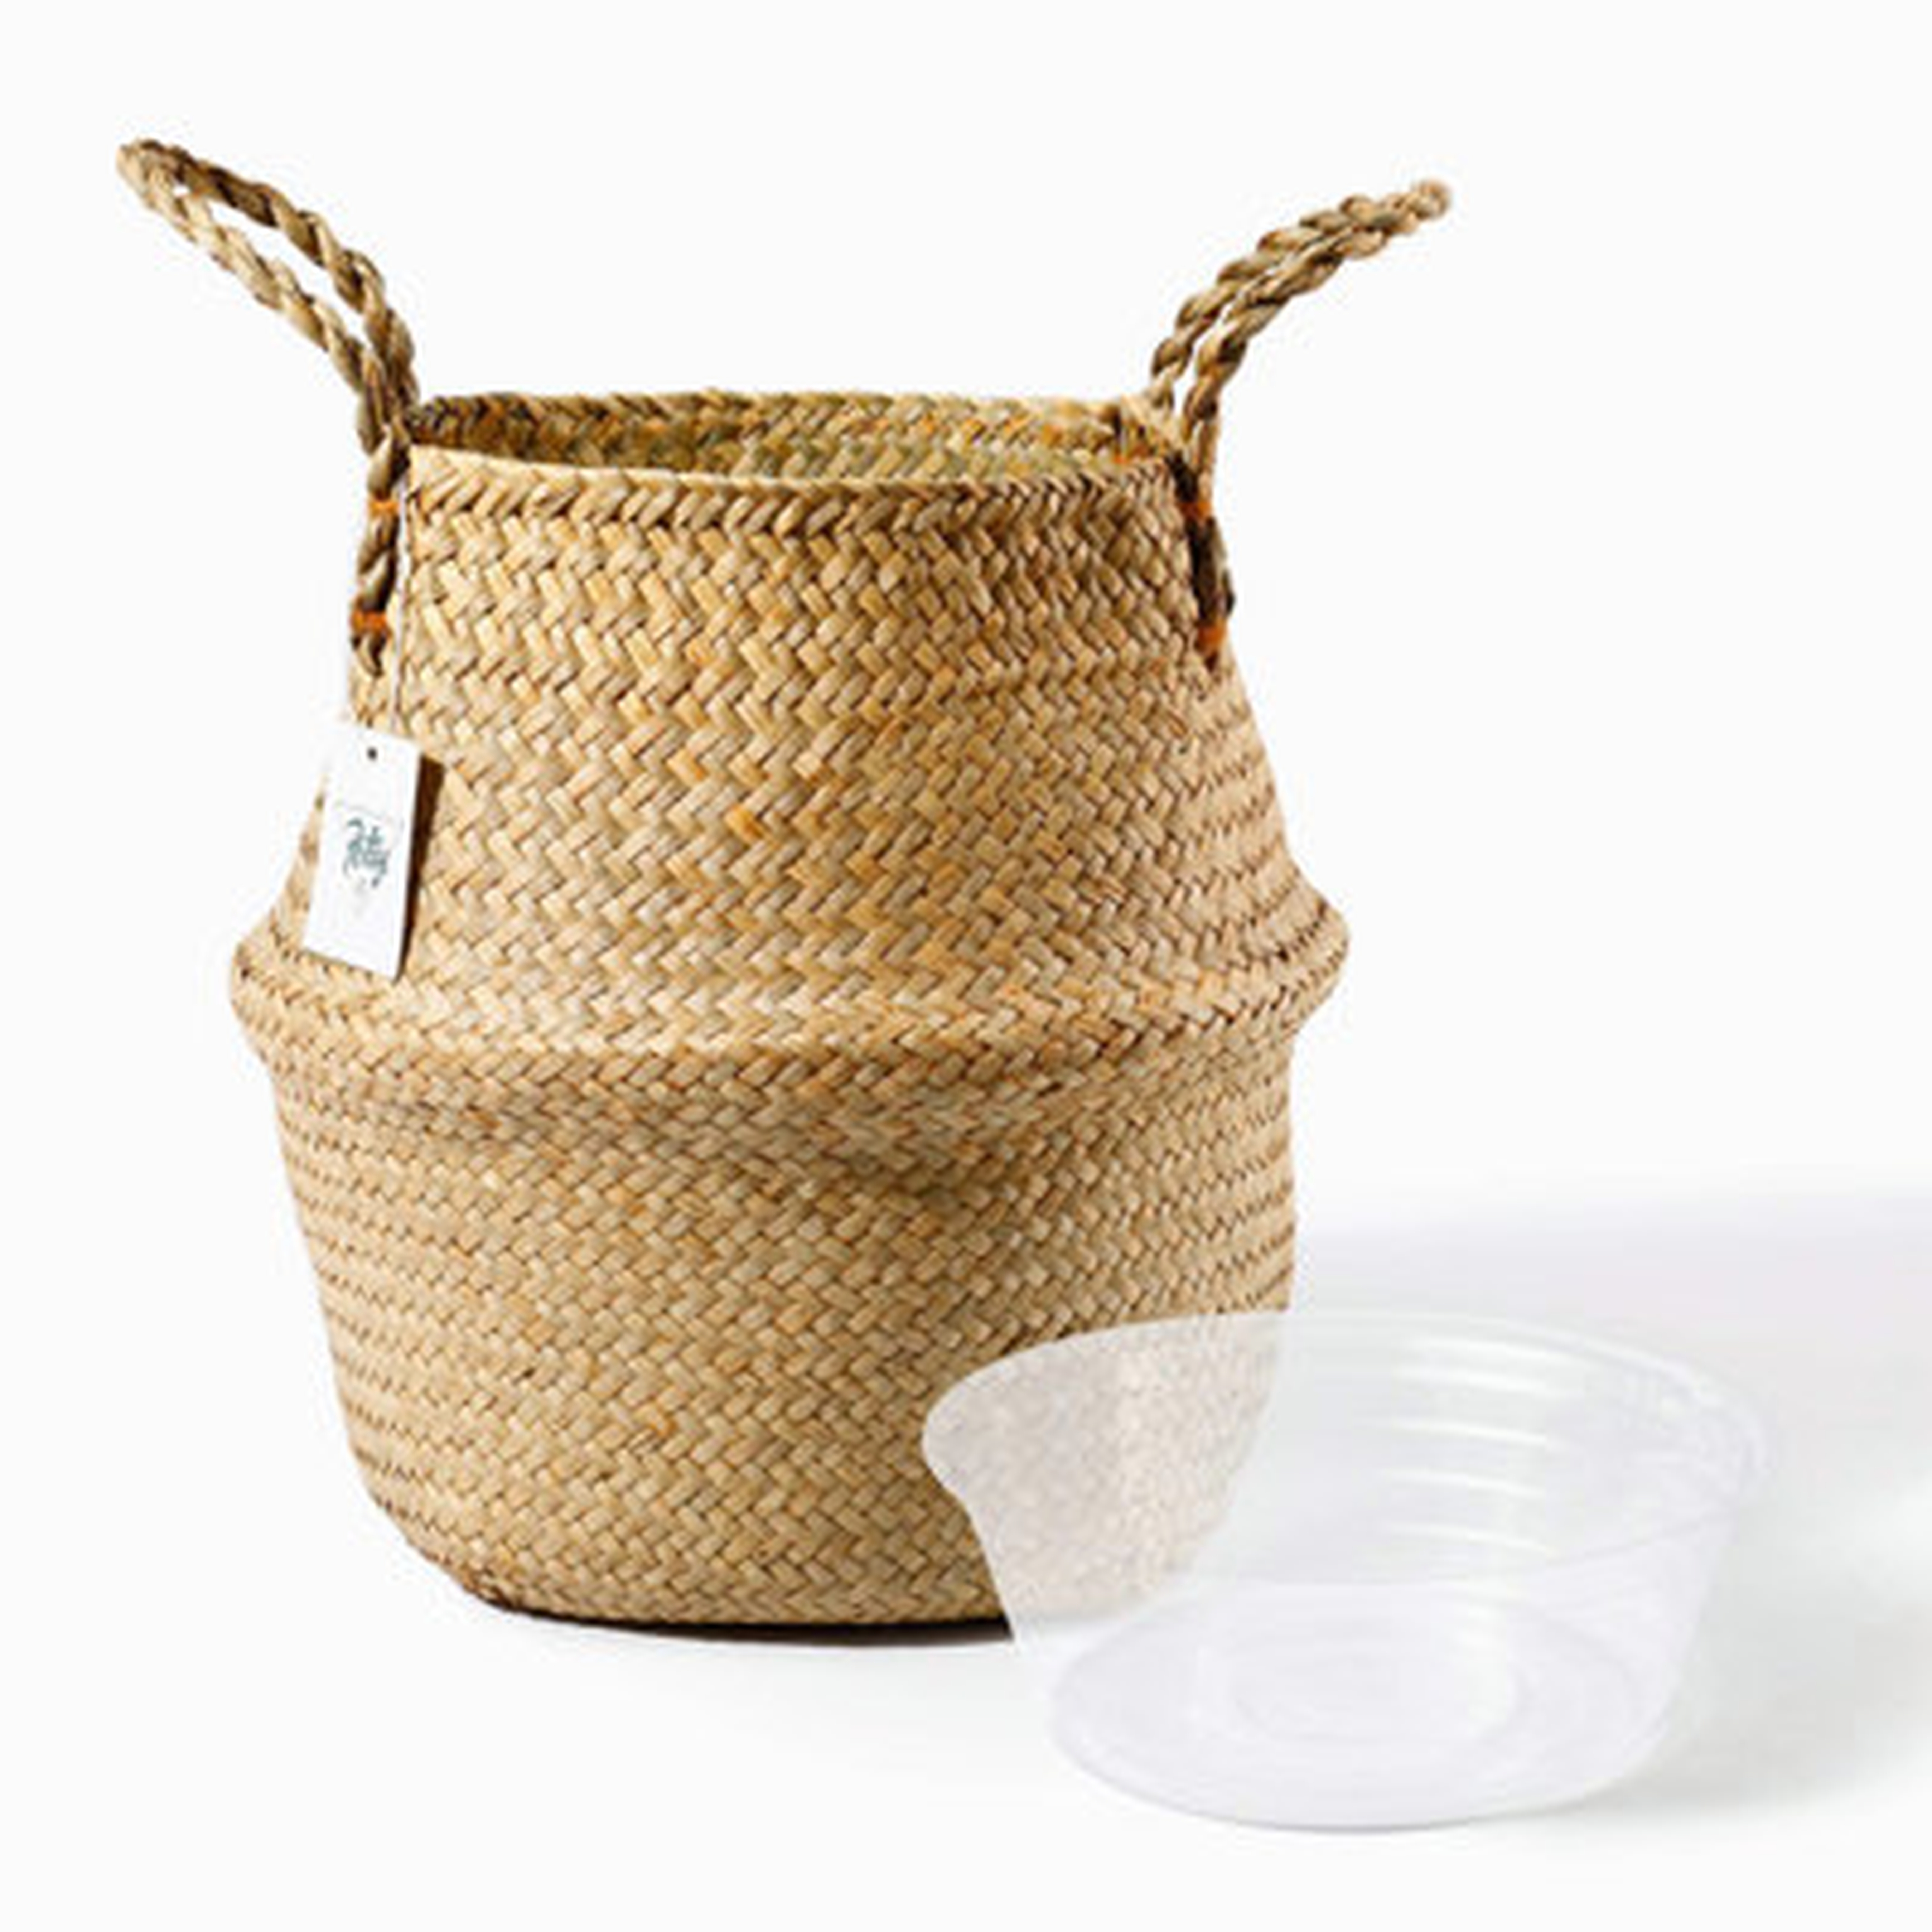 Seagrass Plant Basket - Hand Woven Belly Basket With Handles, Middle Storage Laundry, Picnic, Plant Pot Cover, Home Decor And Woven Straw Beach Bag - Wayfair